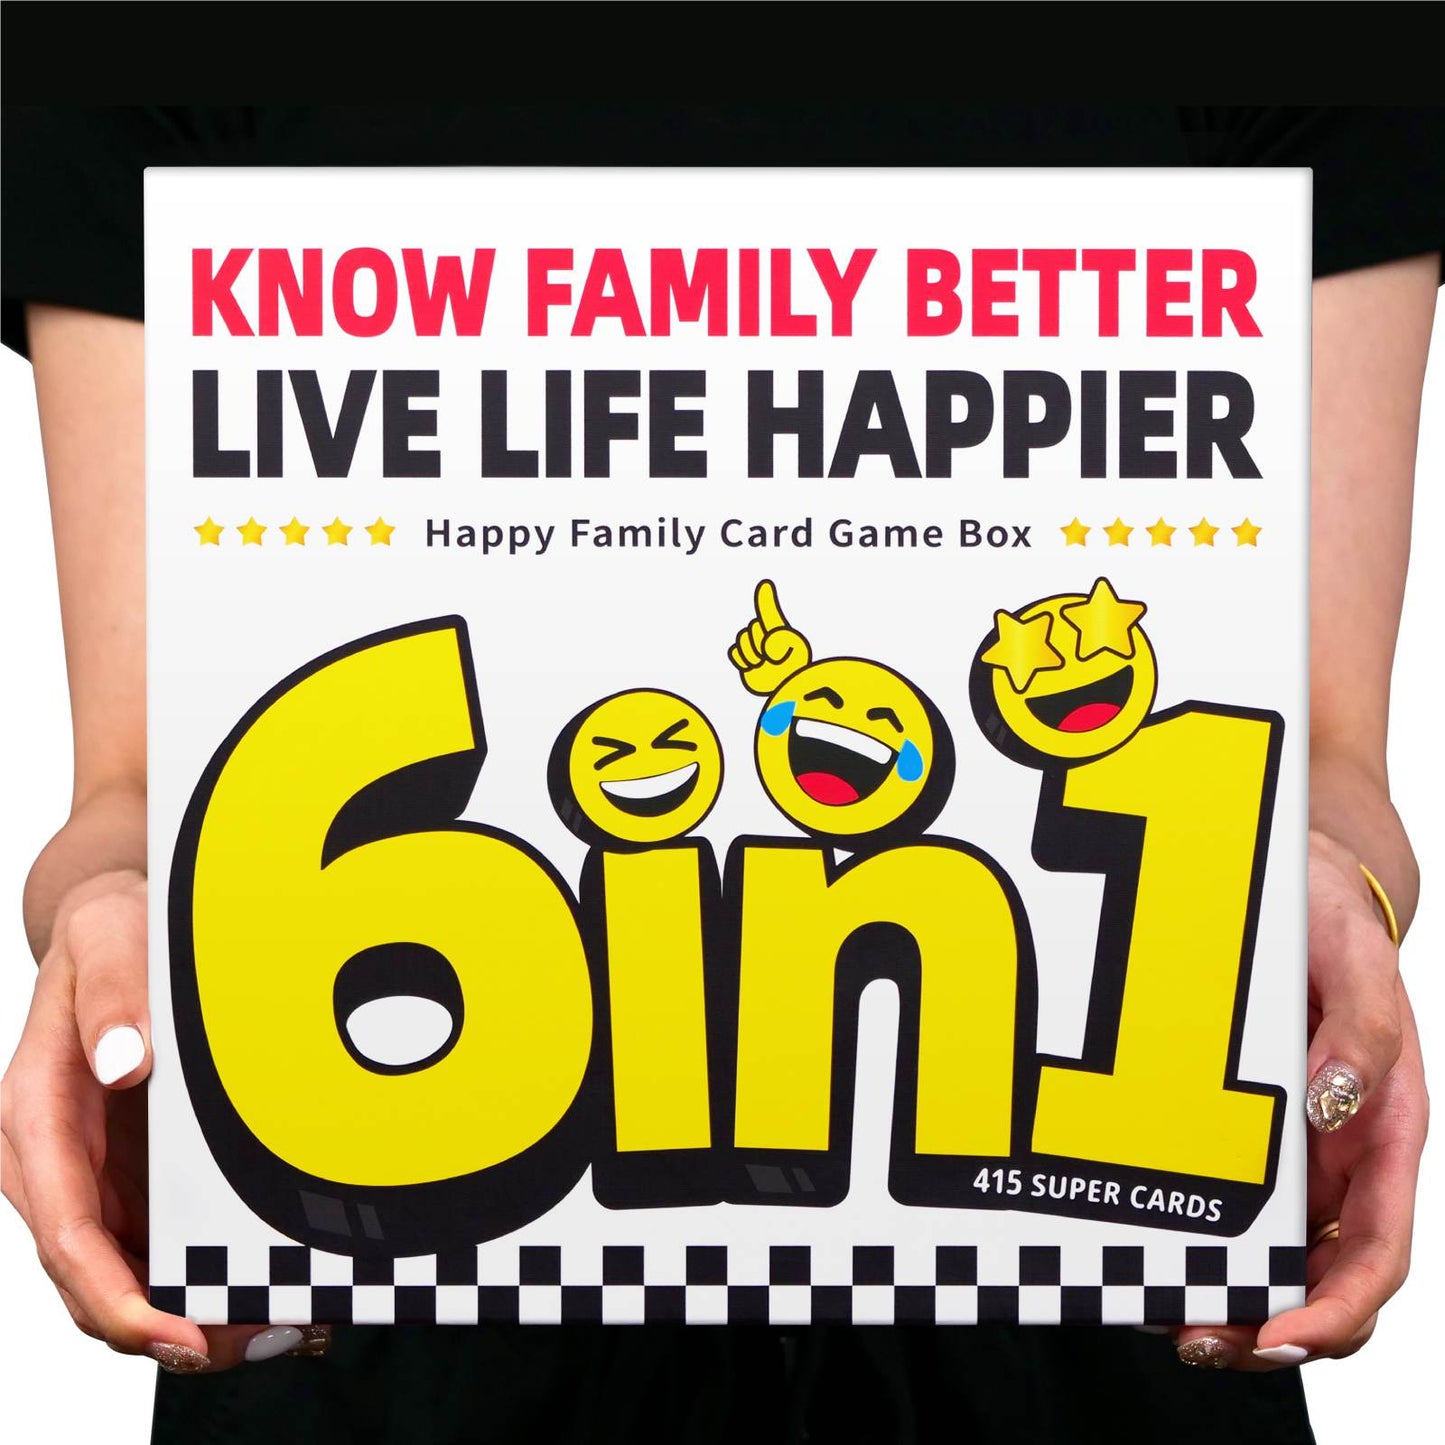 KNOW FAMILY BETTER LIVE LIFE HAPPIER